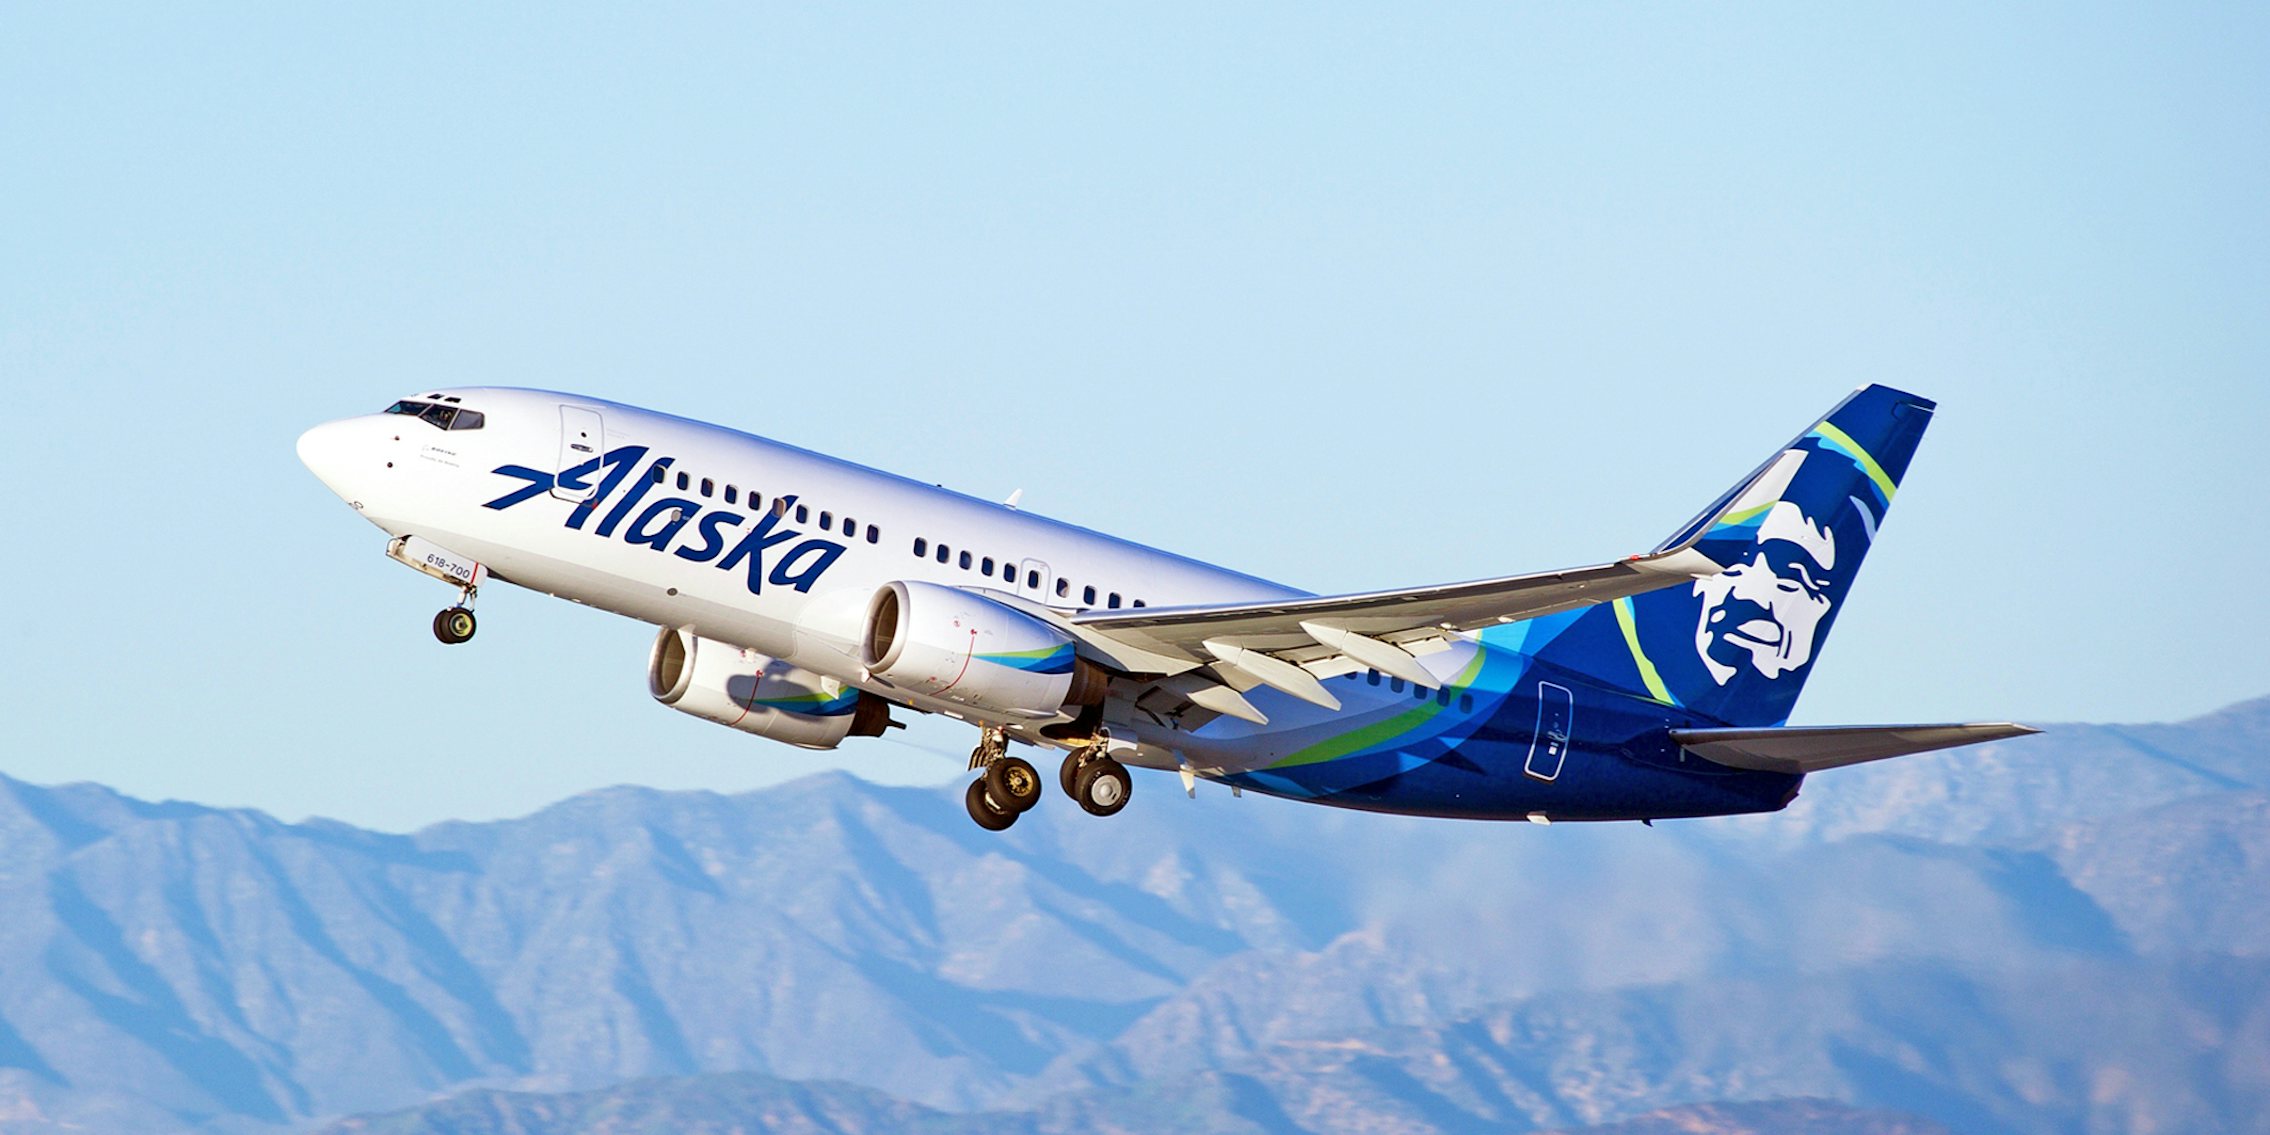 Alaska Airlines Boeing 737 aircraft is airborne with sky and hills in background